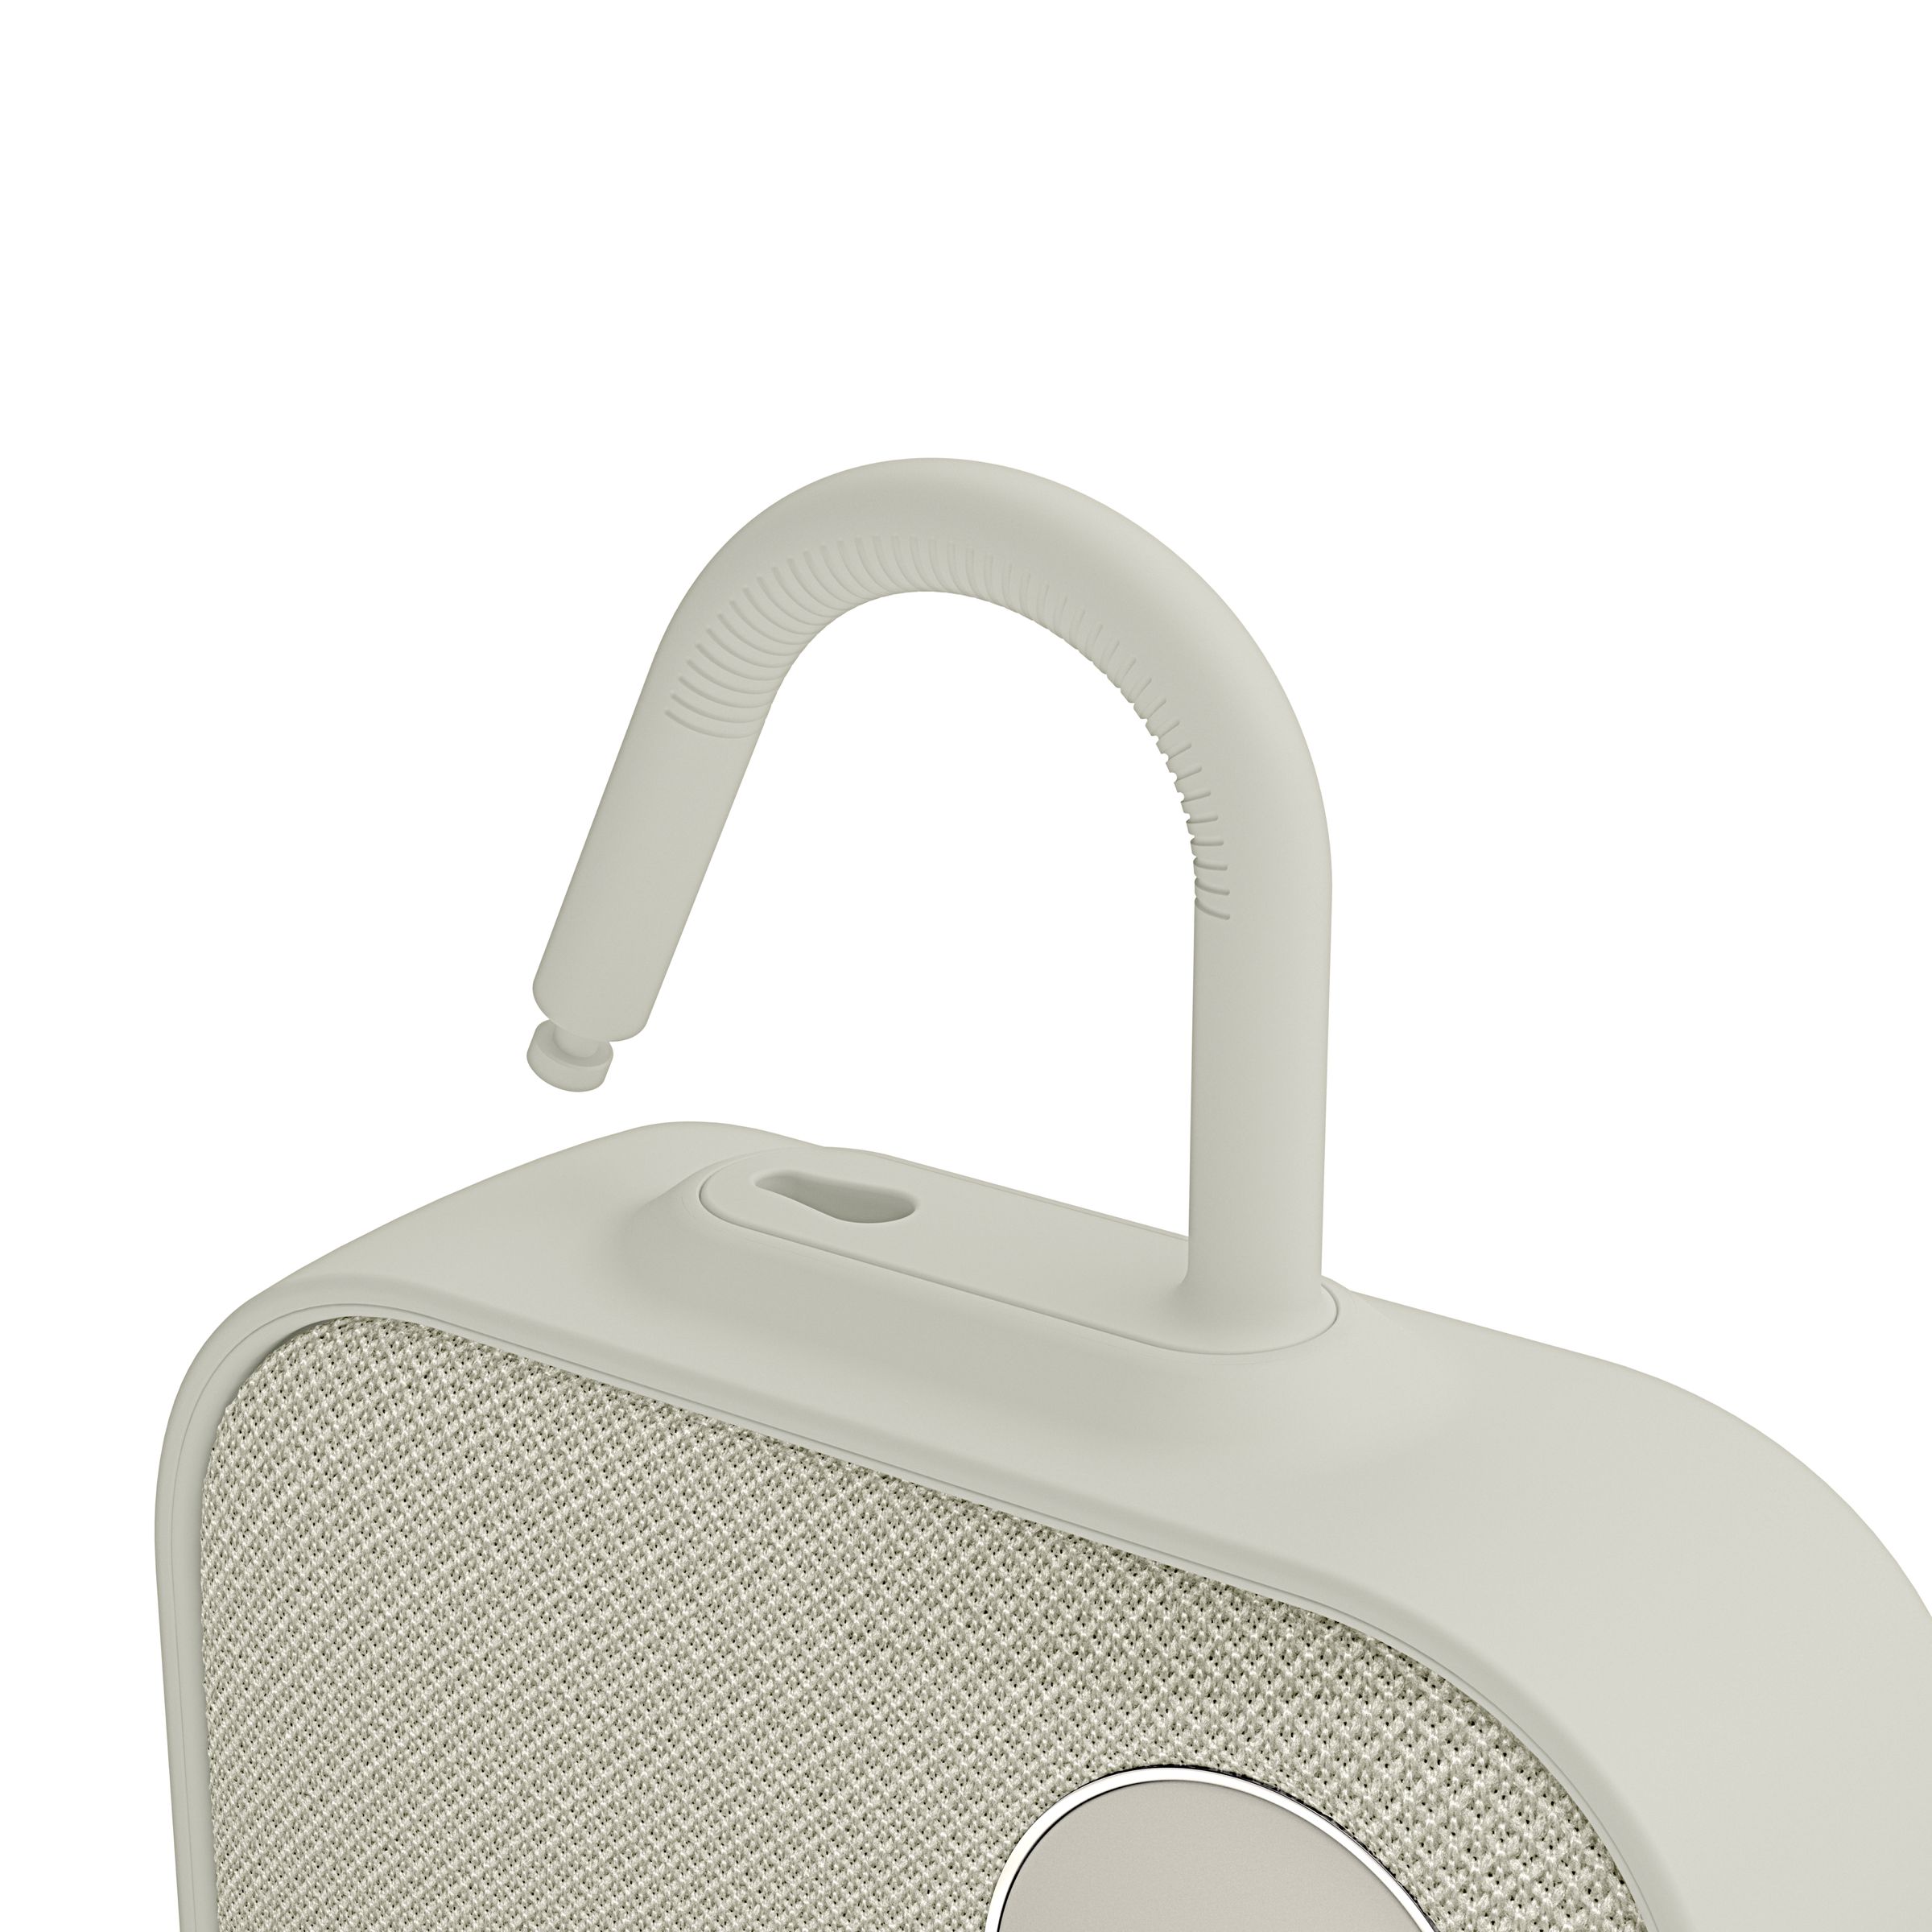 Libratone One and Too speaker press images